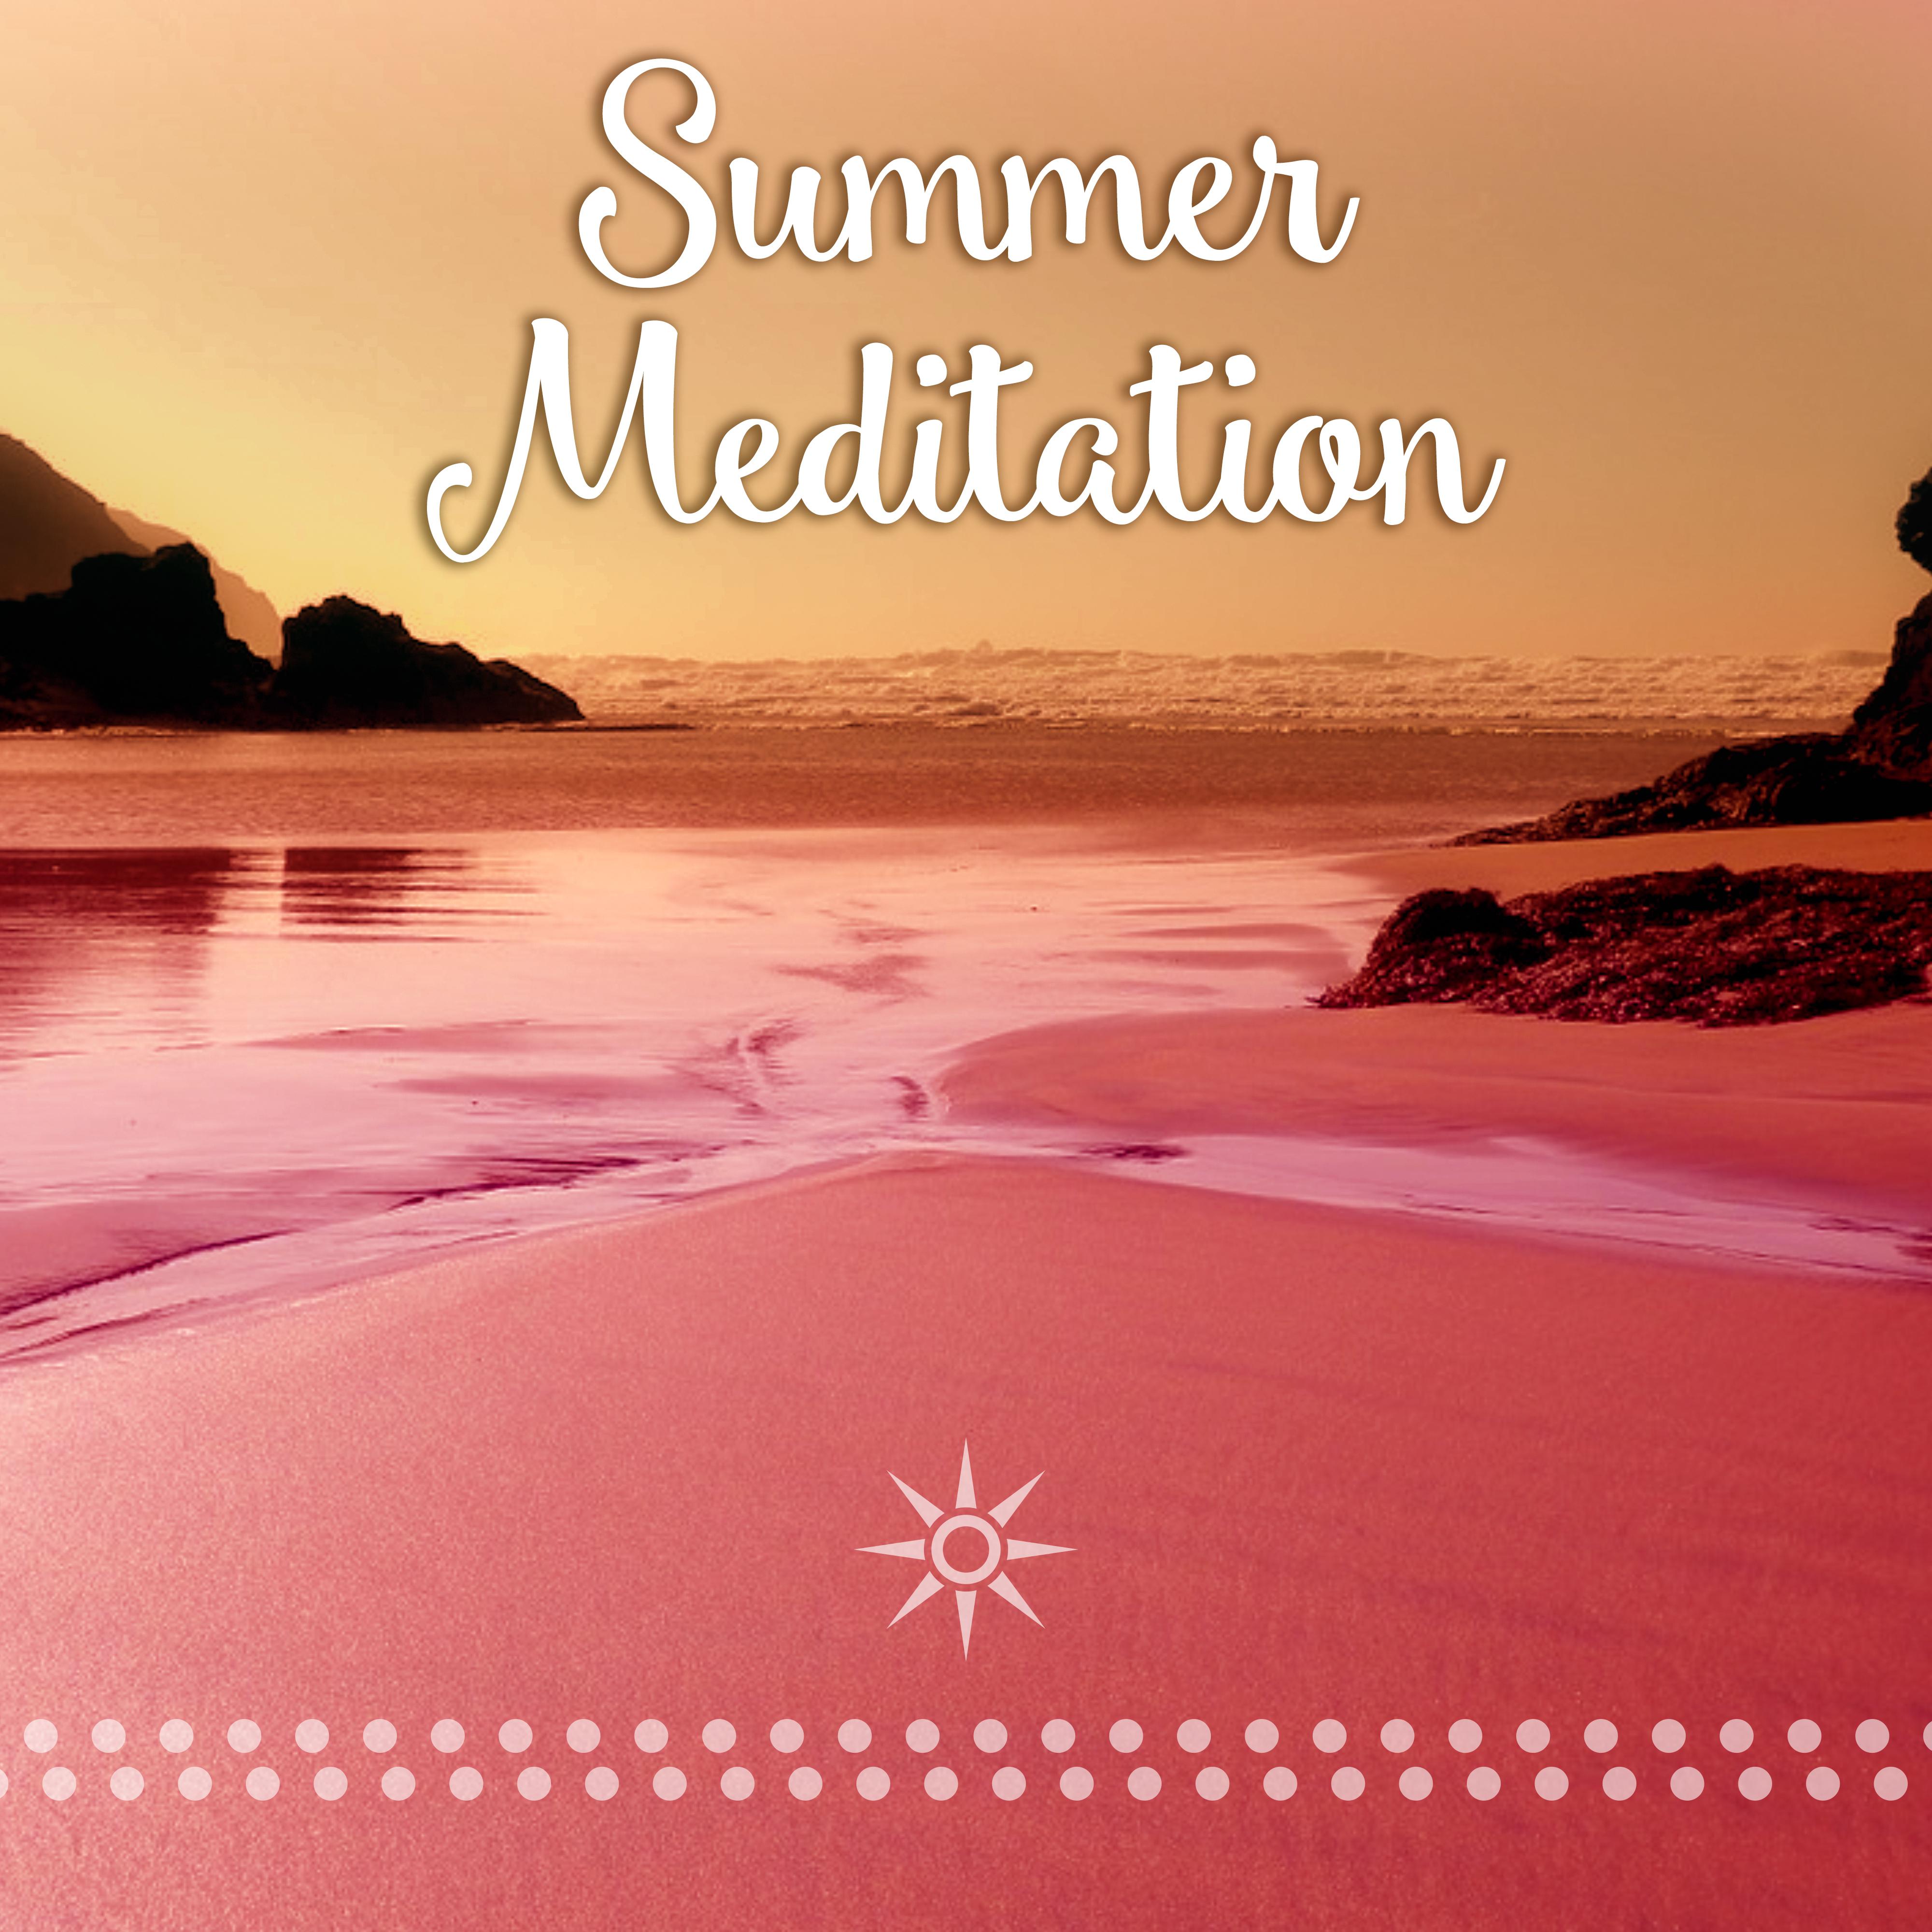 Summer Meditation - Sand Under Foot, Beautiful Sunrise, Glittered with Many Colours